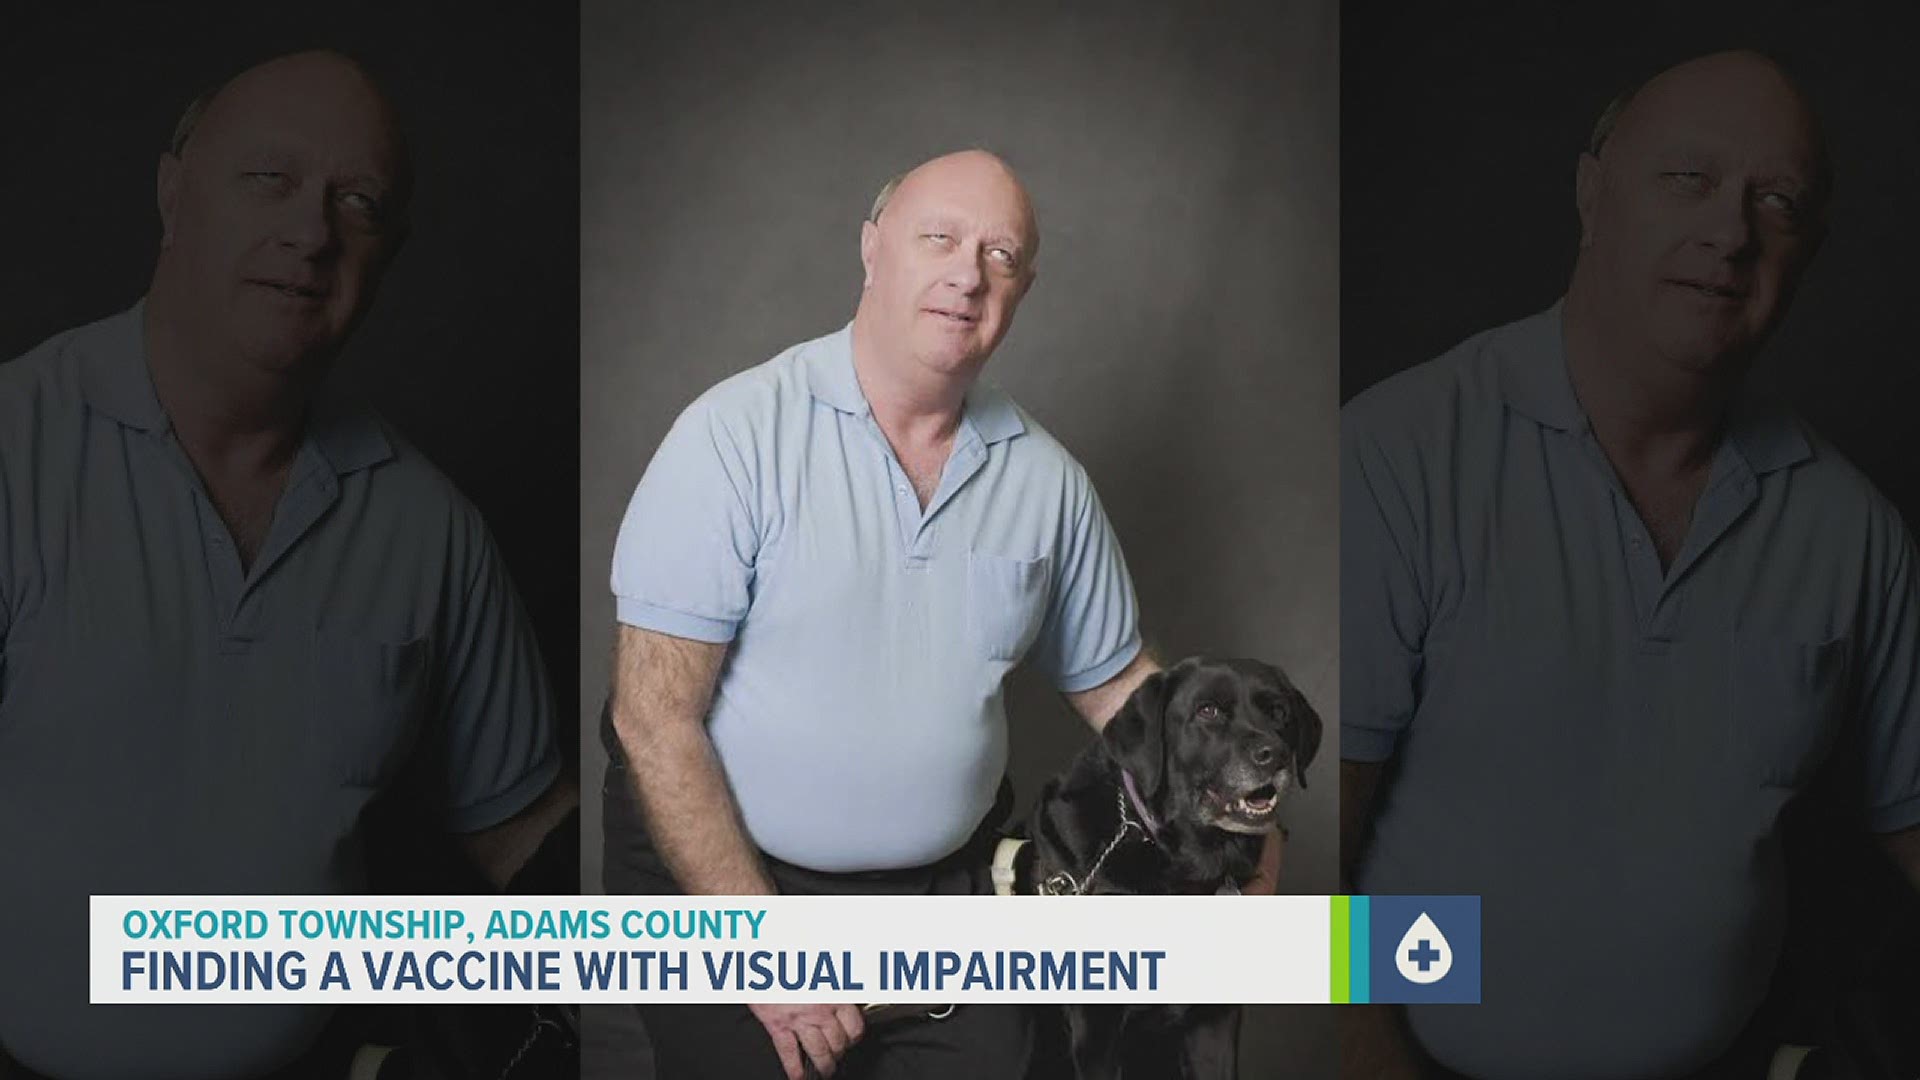 One Adams County man claims his blindness delayed him from accessing the vaccine.